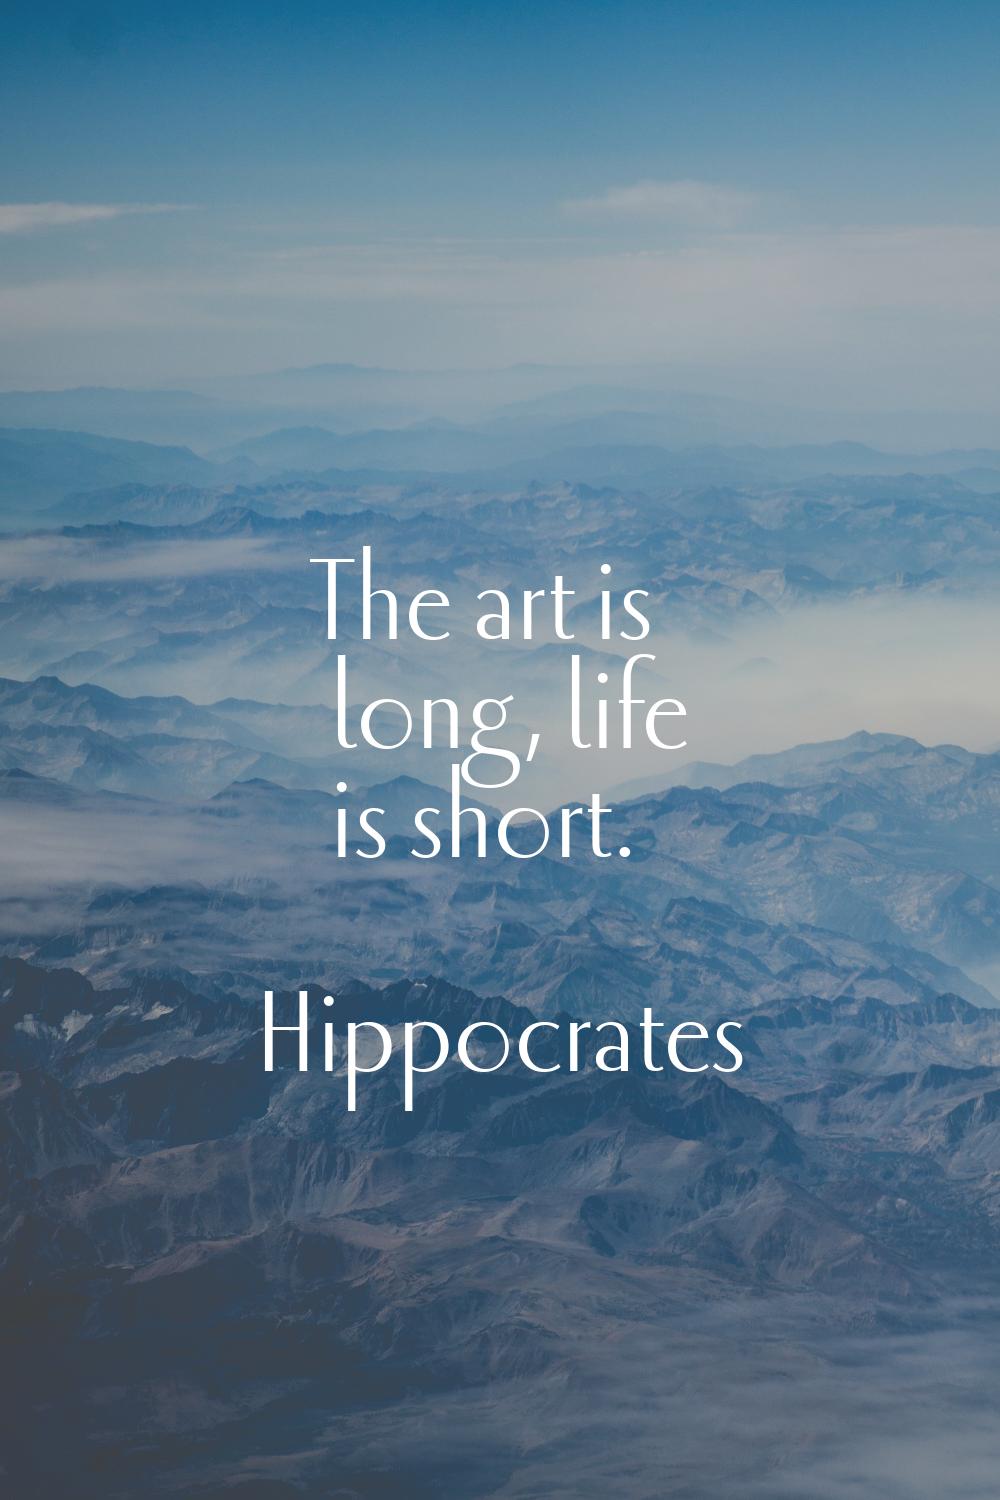 The art is long, life is short.